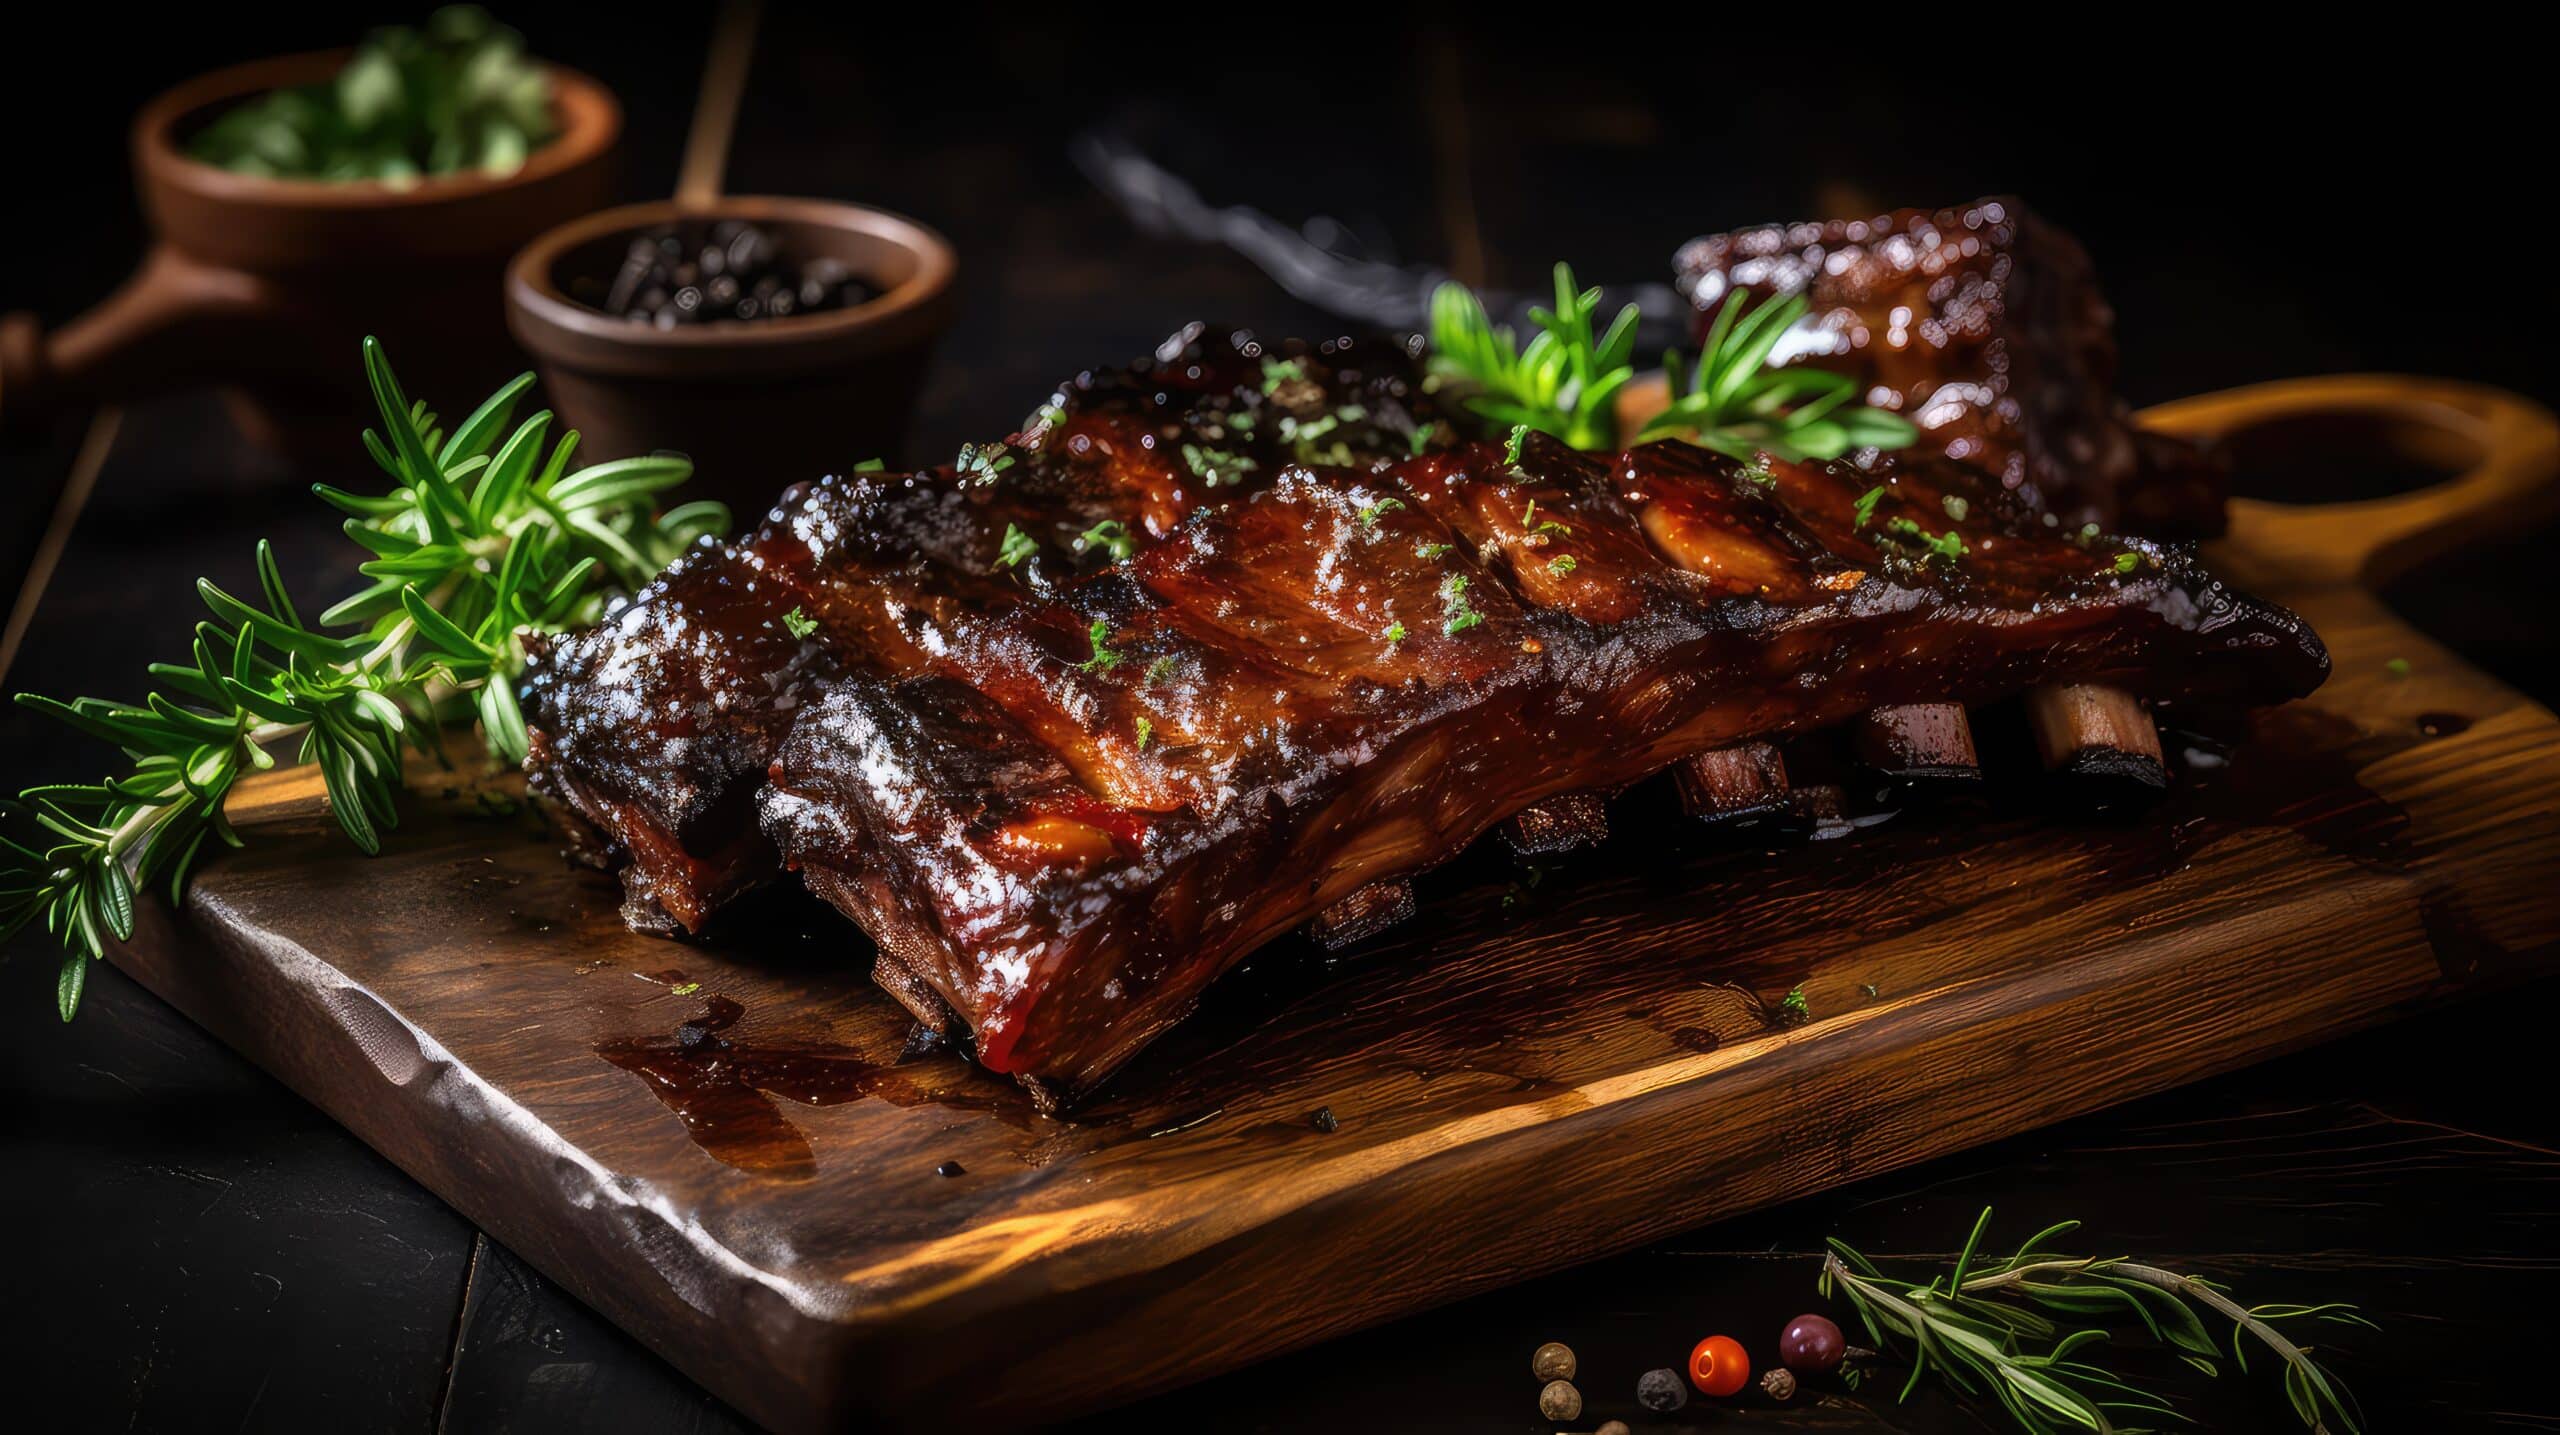 www.appr.com : How To Cook Ribs On A Gas Grill?